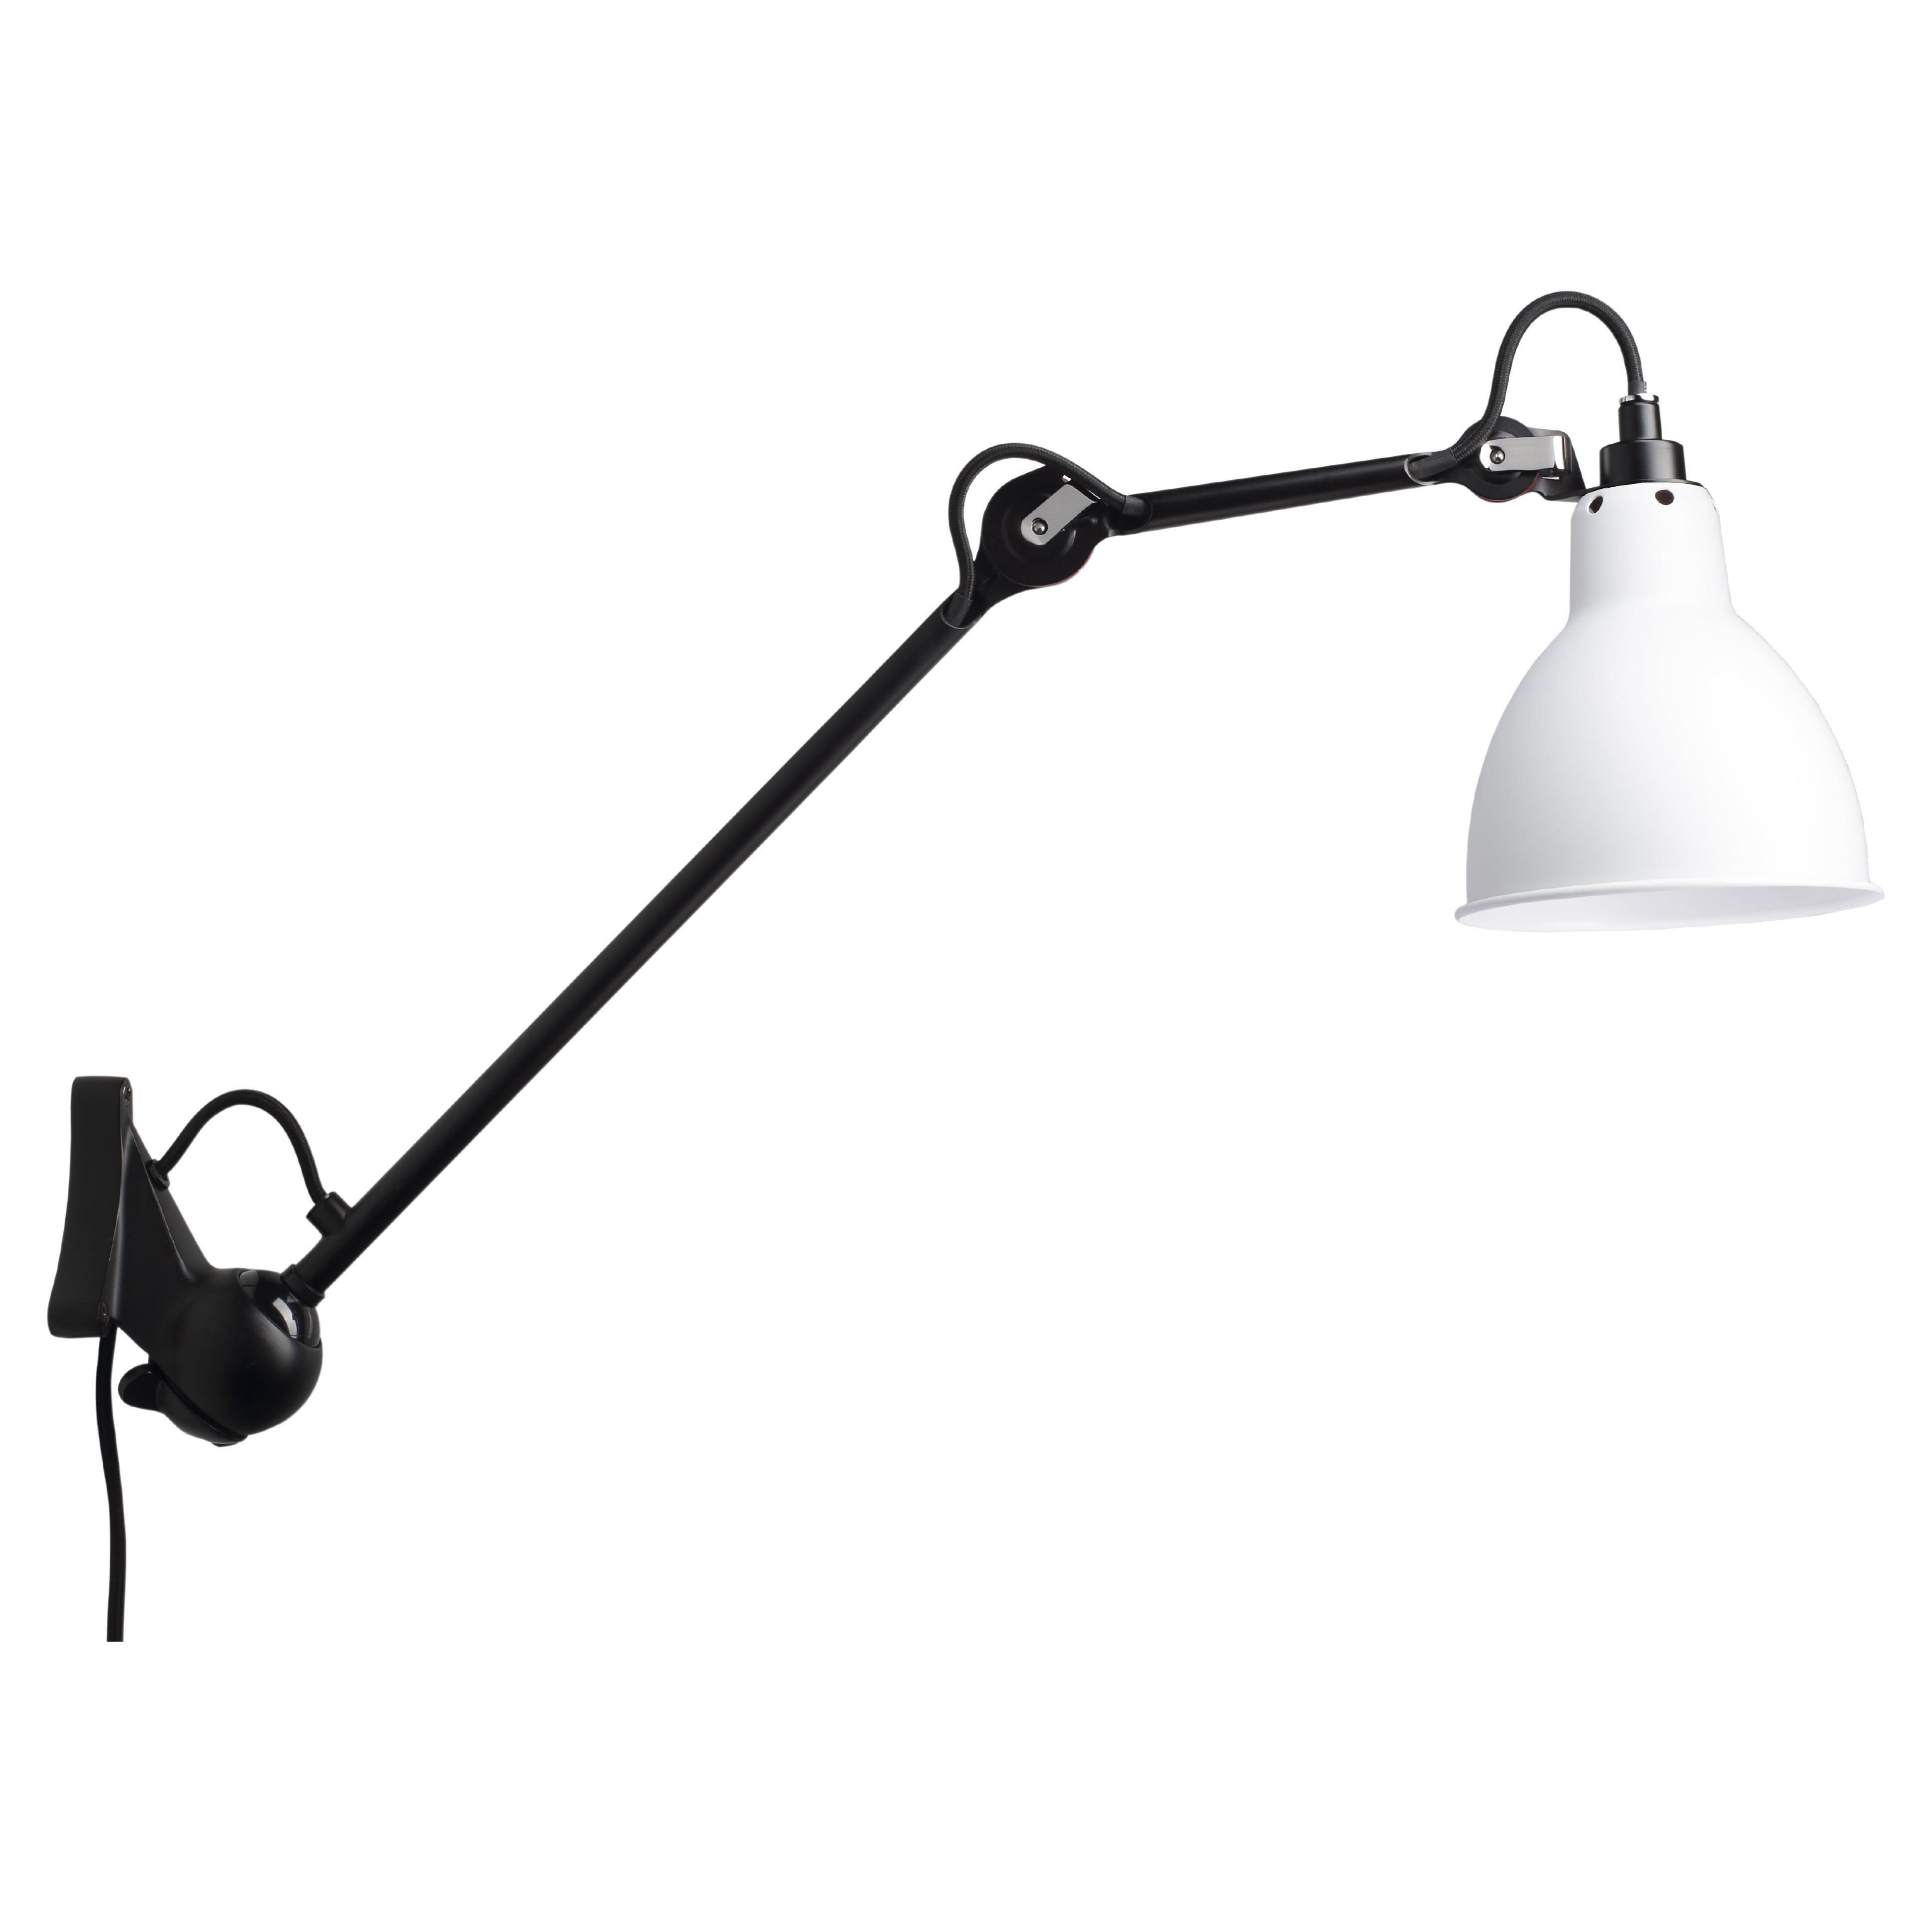 DCW Editions La Lampe Gras N°222 Wall Lamp in Black Arm and White Shade For Sale